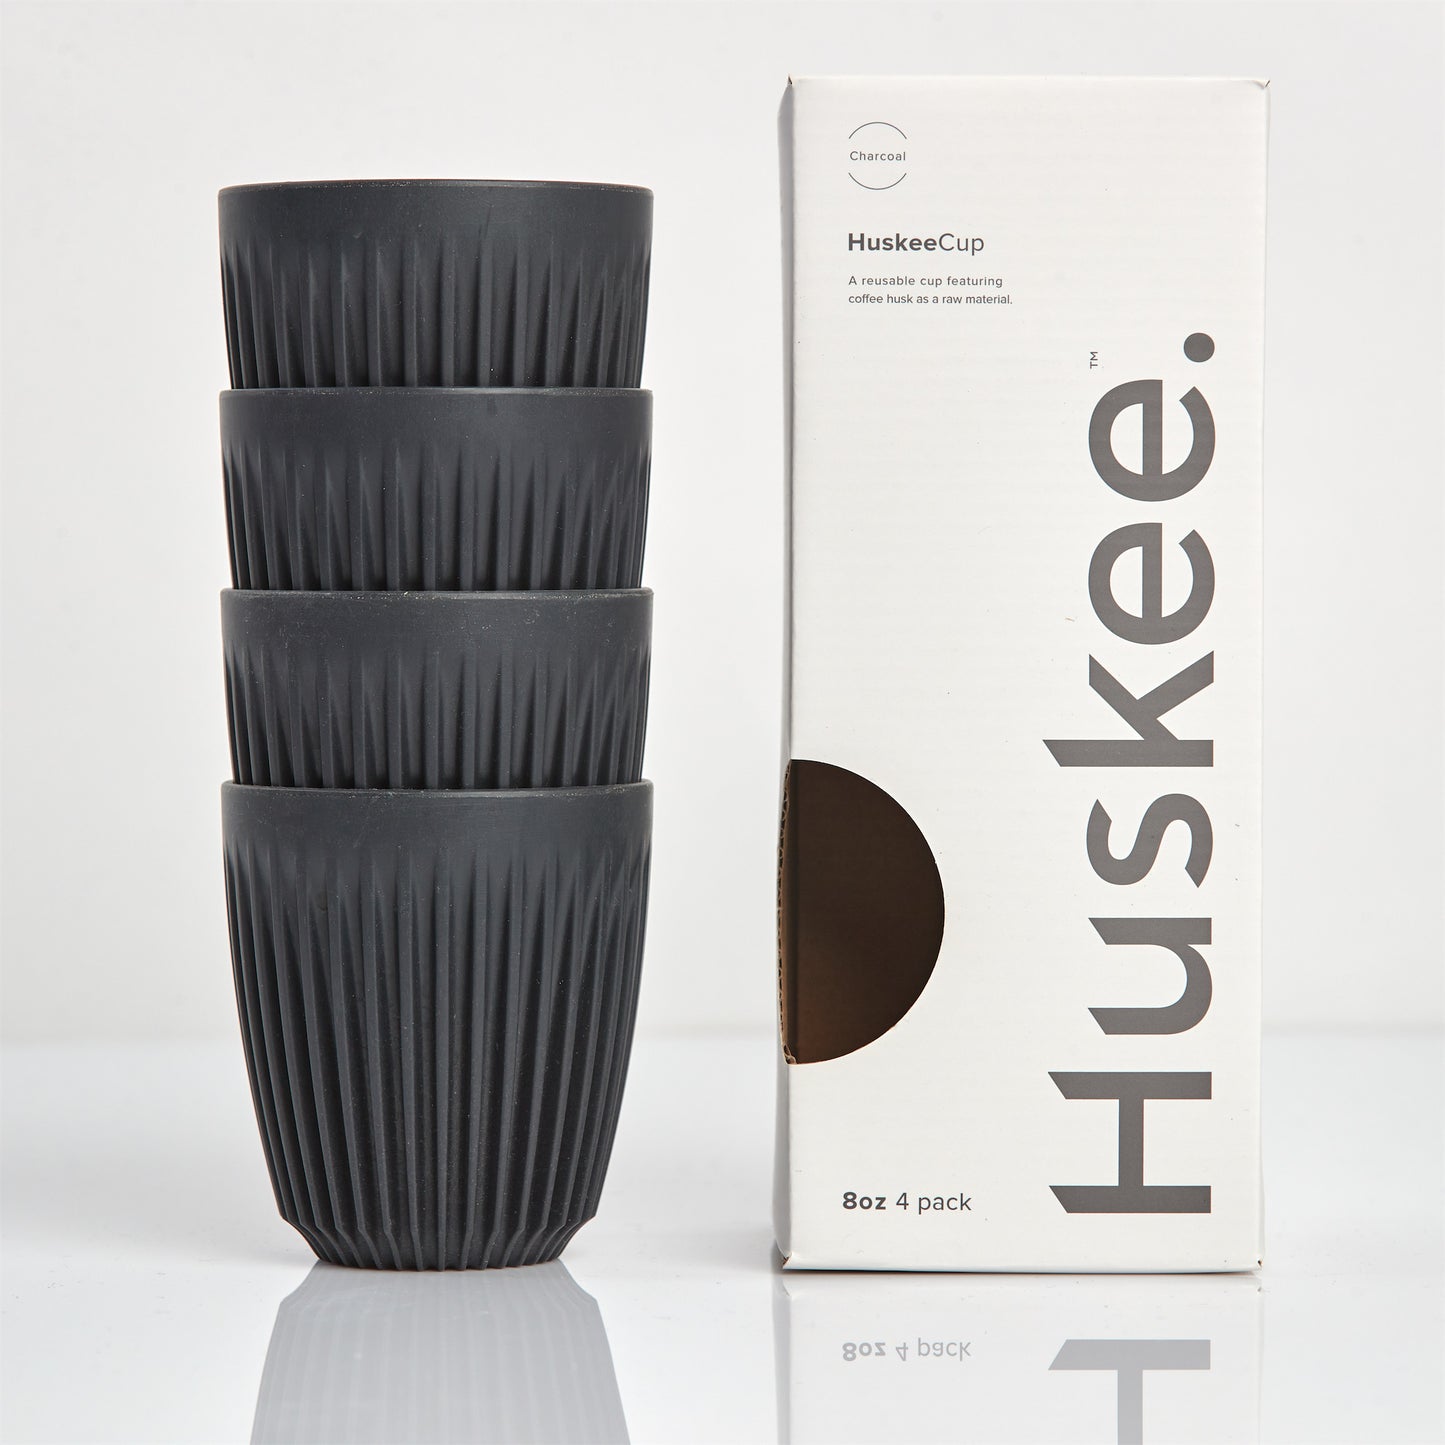 8oz 4-Pack Husk Cup - Charcoal